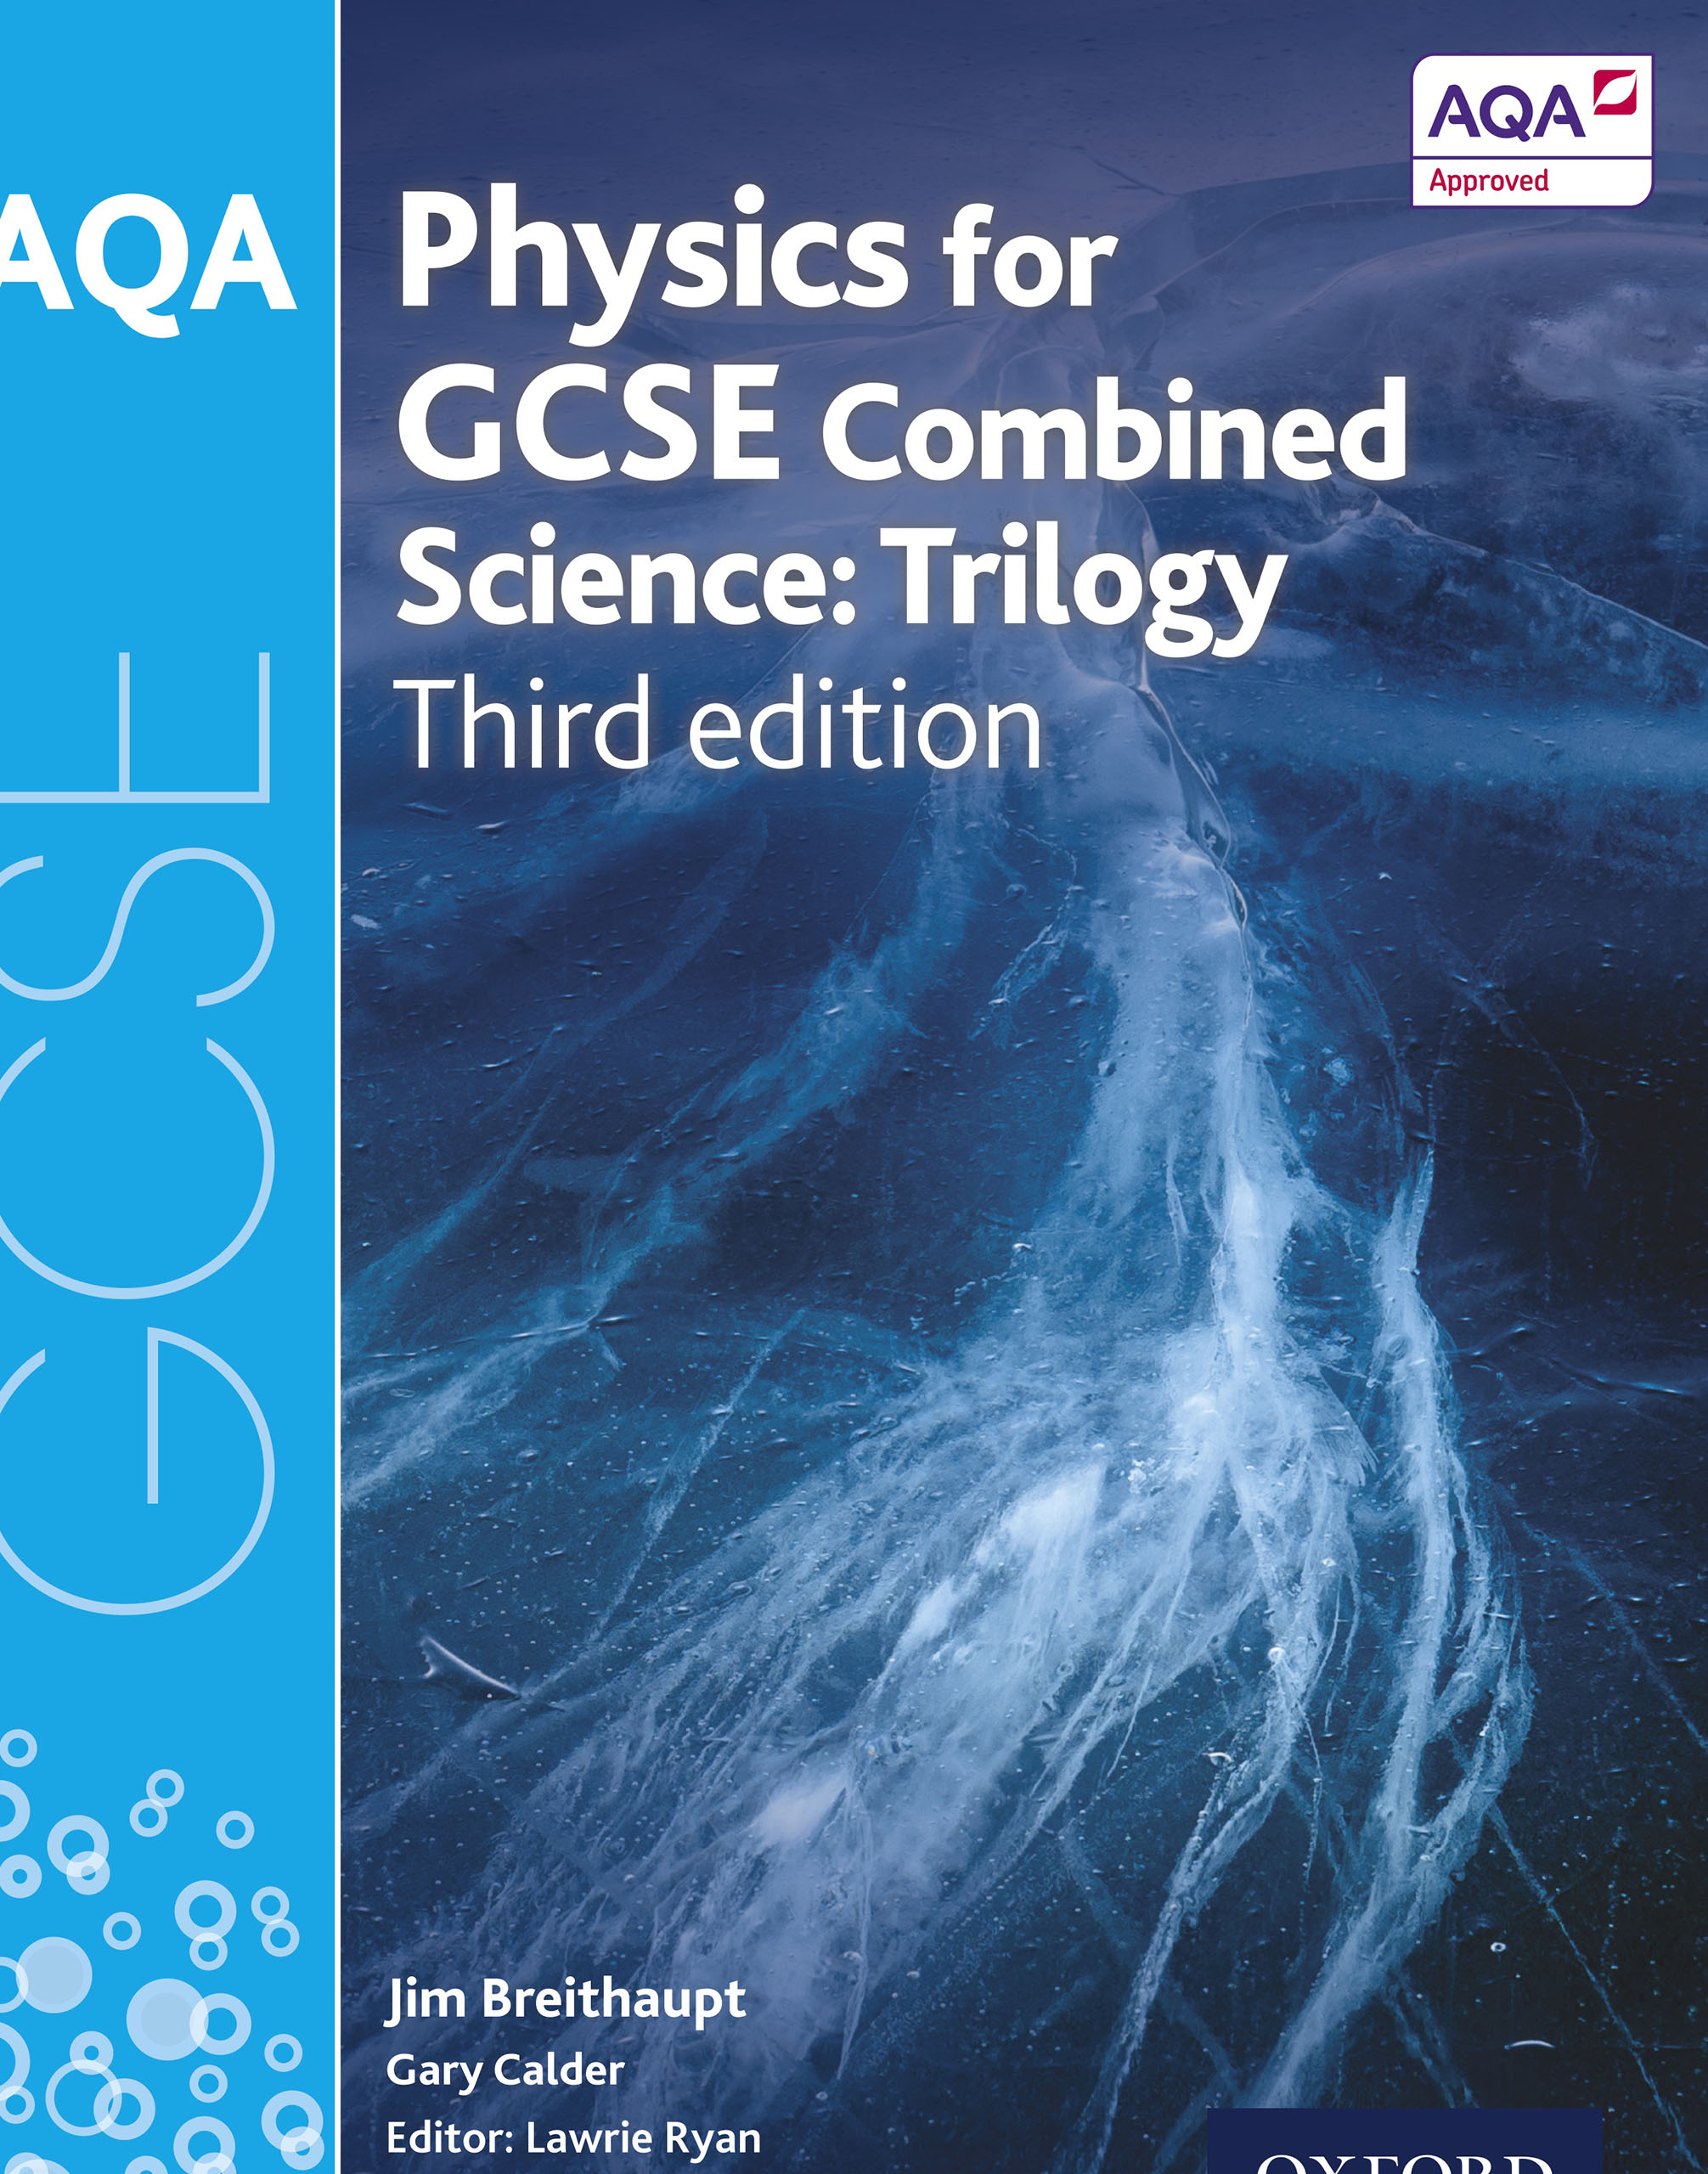 AQA Physics for GCSE Ccombined Science: Trilogy (thrid edition)